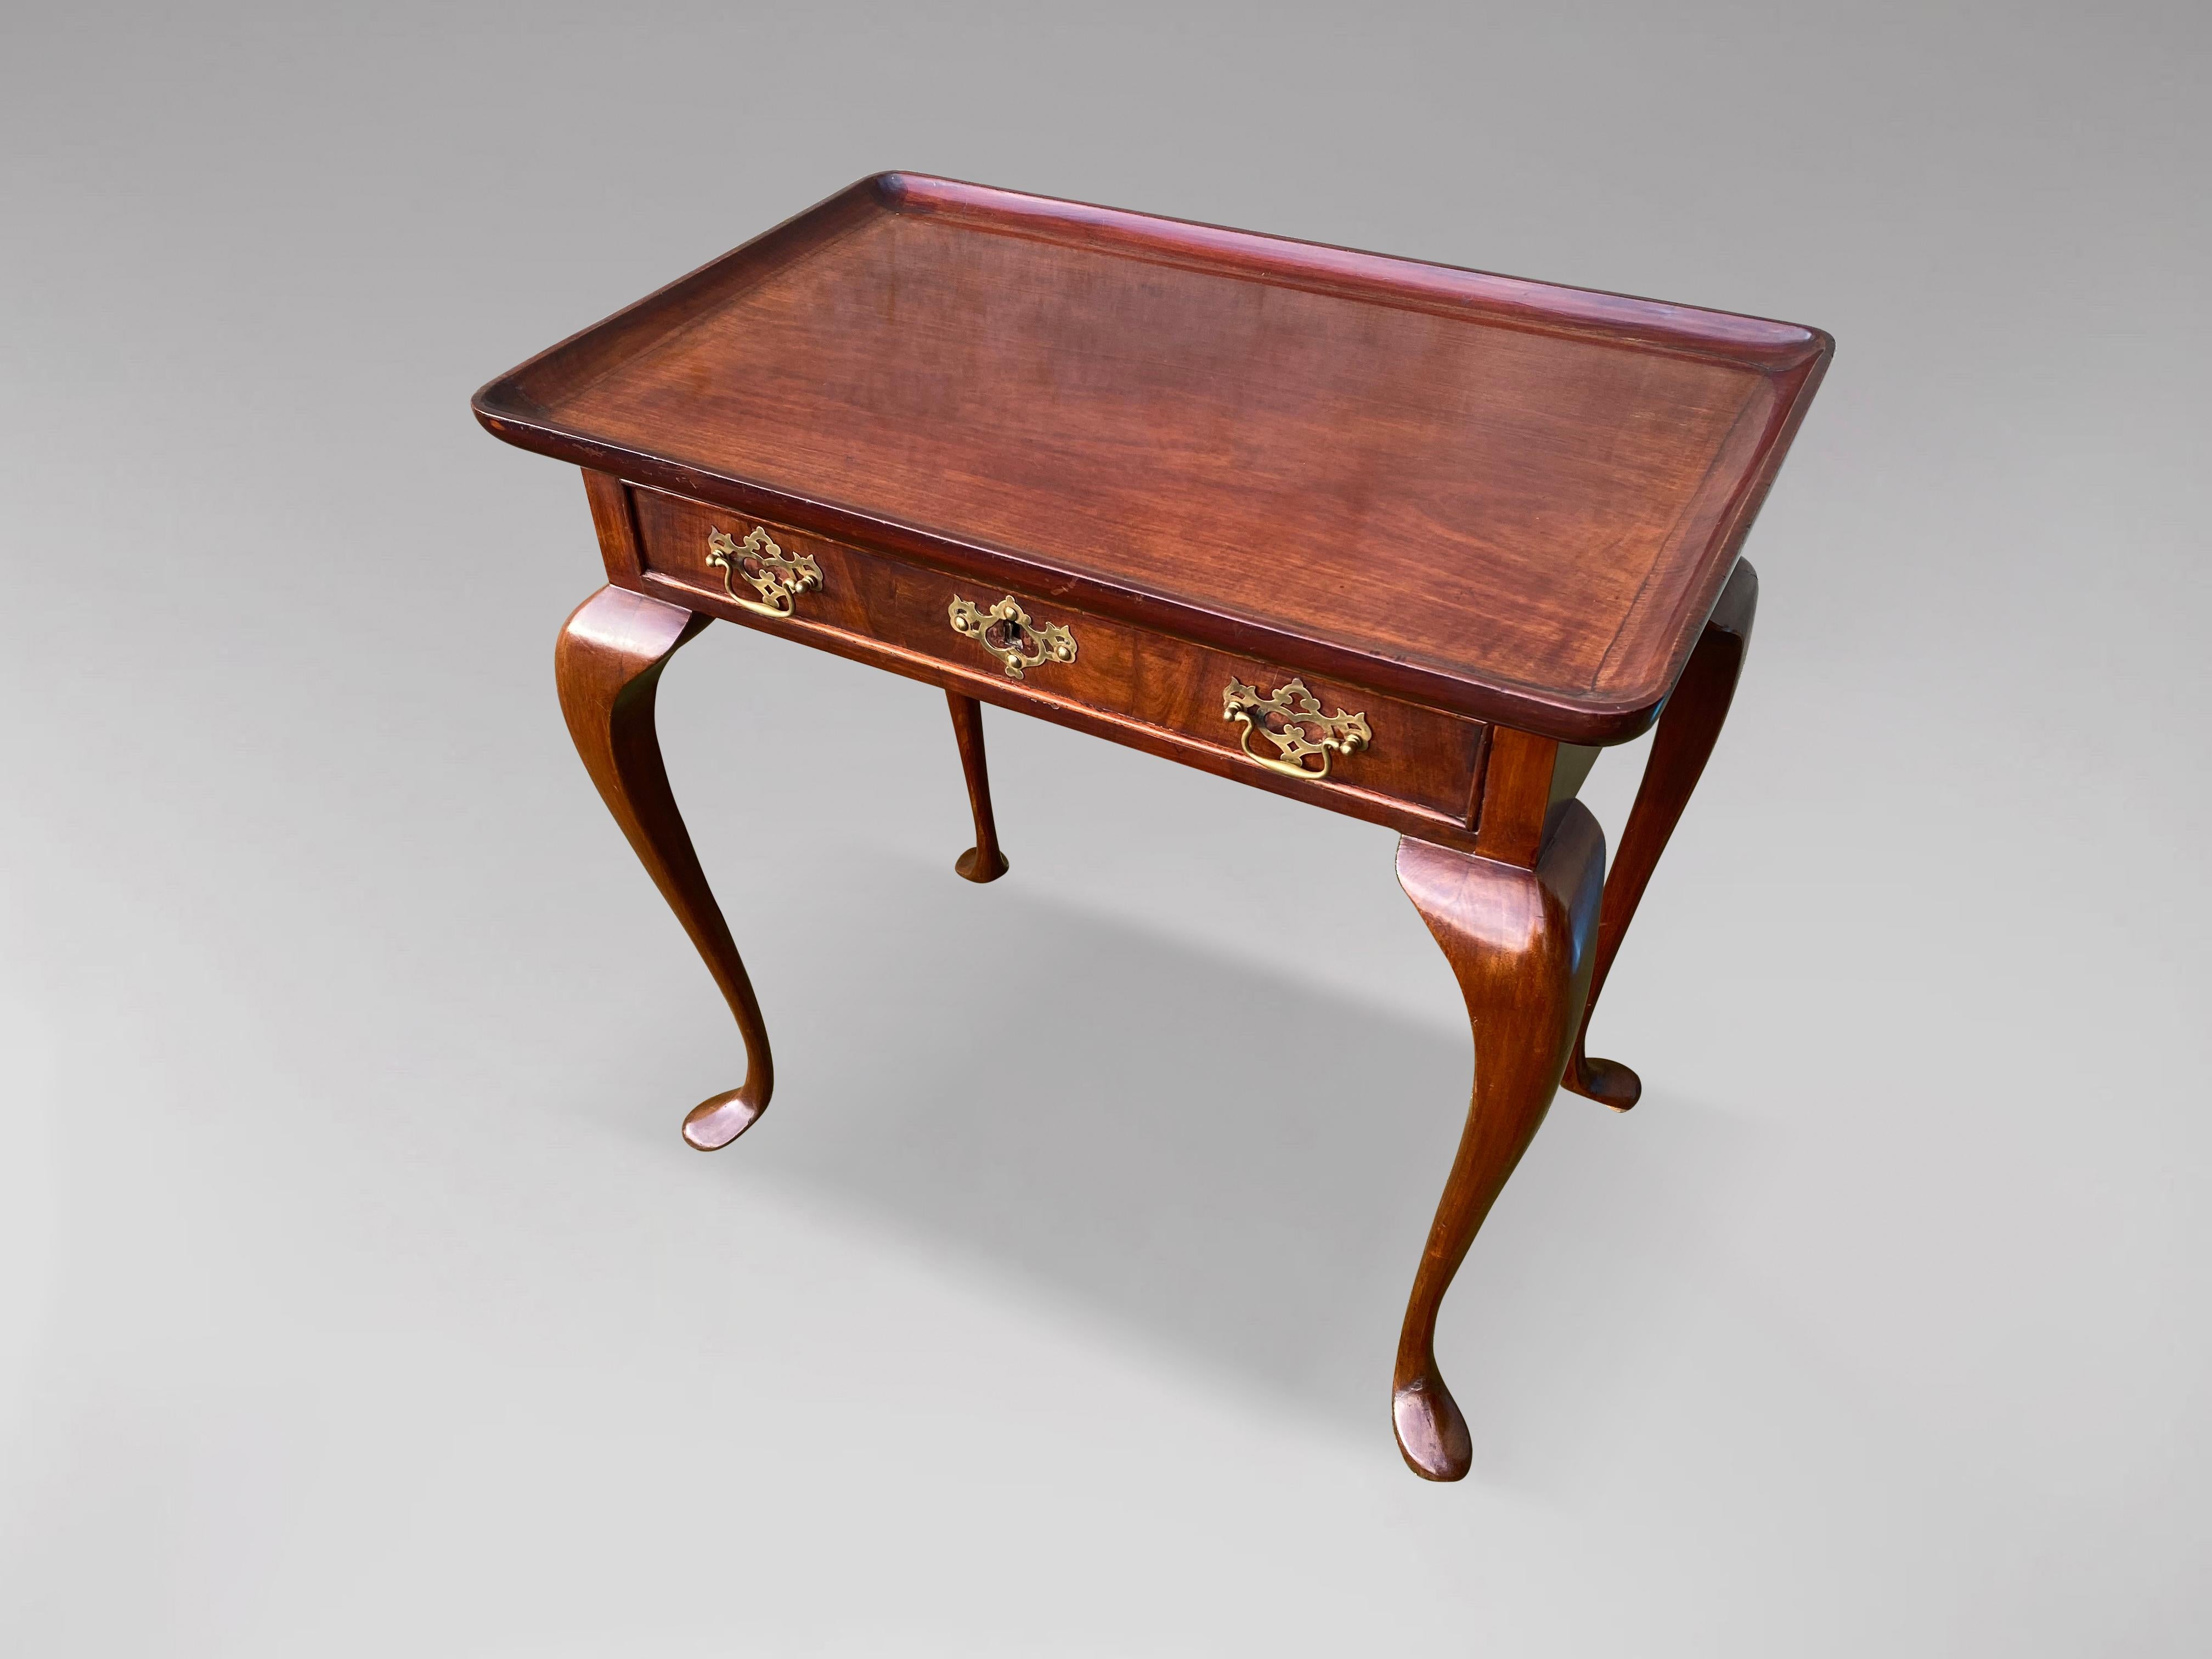 A very fine 18th century George II period mahogany tea table featuring rectangular dish top with raised moulded edges, plain skirts comprising one long single drawer with cock beading boarding and with a pair of later brass handles. Standing on very